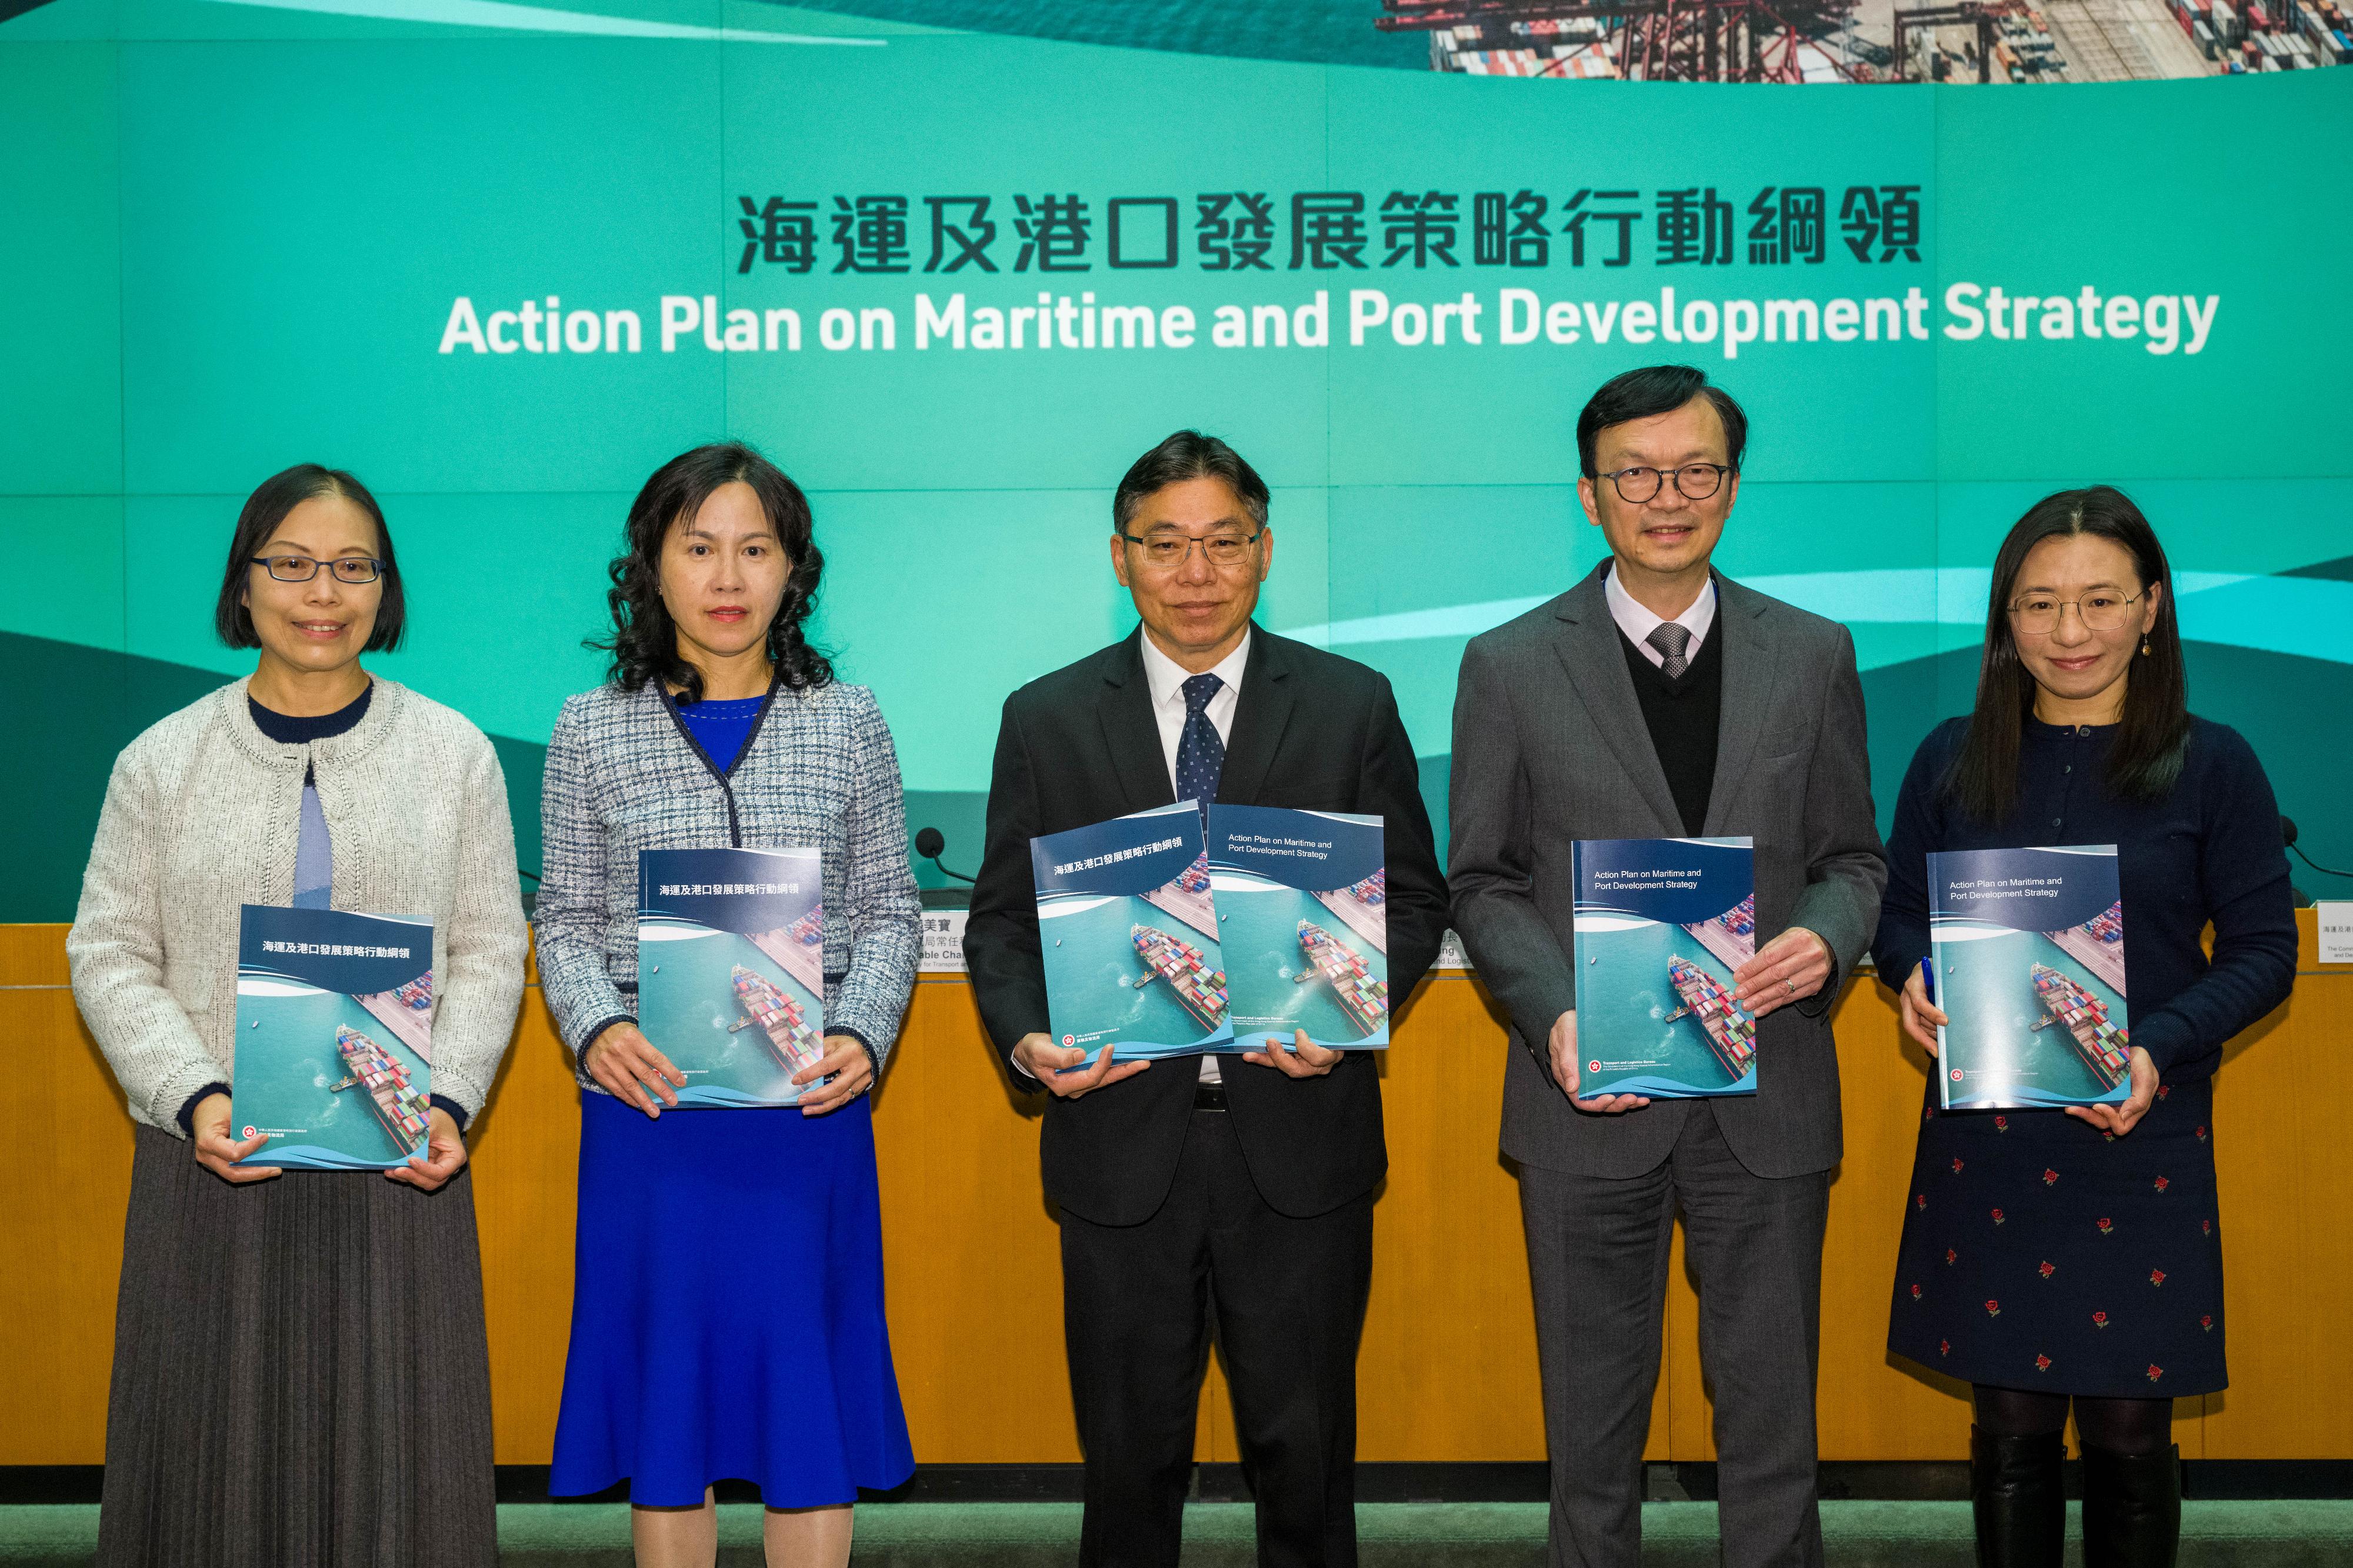 The Secretary for Transport and Logistics, Mr Lam Sai-hung, promulgated today (December 20) the Action Plan on Maritime and Port Development Strategy to formulate strategies and action measures to support the sustainable development needs of the maritime and port industry in Hong Kong, with a view to enhancing the long-term competitiveness of the industry. Photo shows Mr Lam (centre); the Permanent Secretary for Transport and Logistics, Ms Mable Chan (second left); the Under Secretary for Transport and Logistics, Mr Liu Chun-san (second right); the Director of Marine, Ms Carol Yuen (first left); and the Commissioner for Maritime and Port Development and Deputy Secretary for Transport and Logistics, Miss Amy Chan (first right), at the press conference.